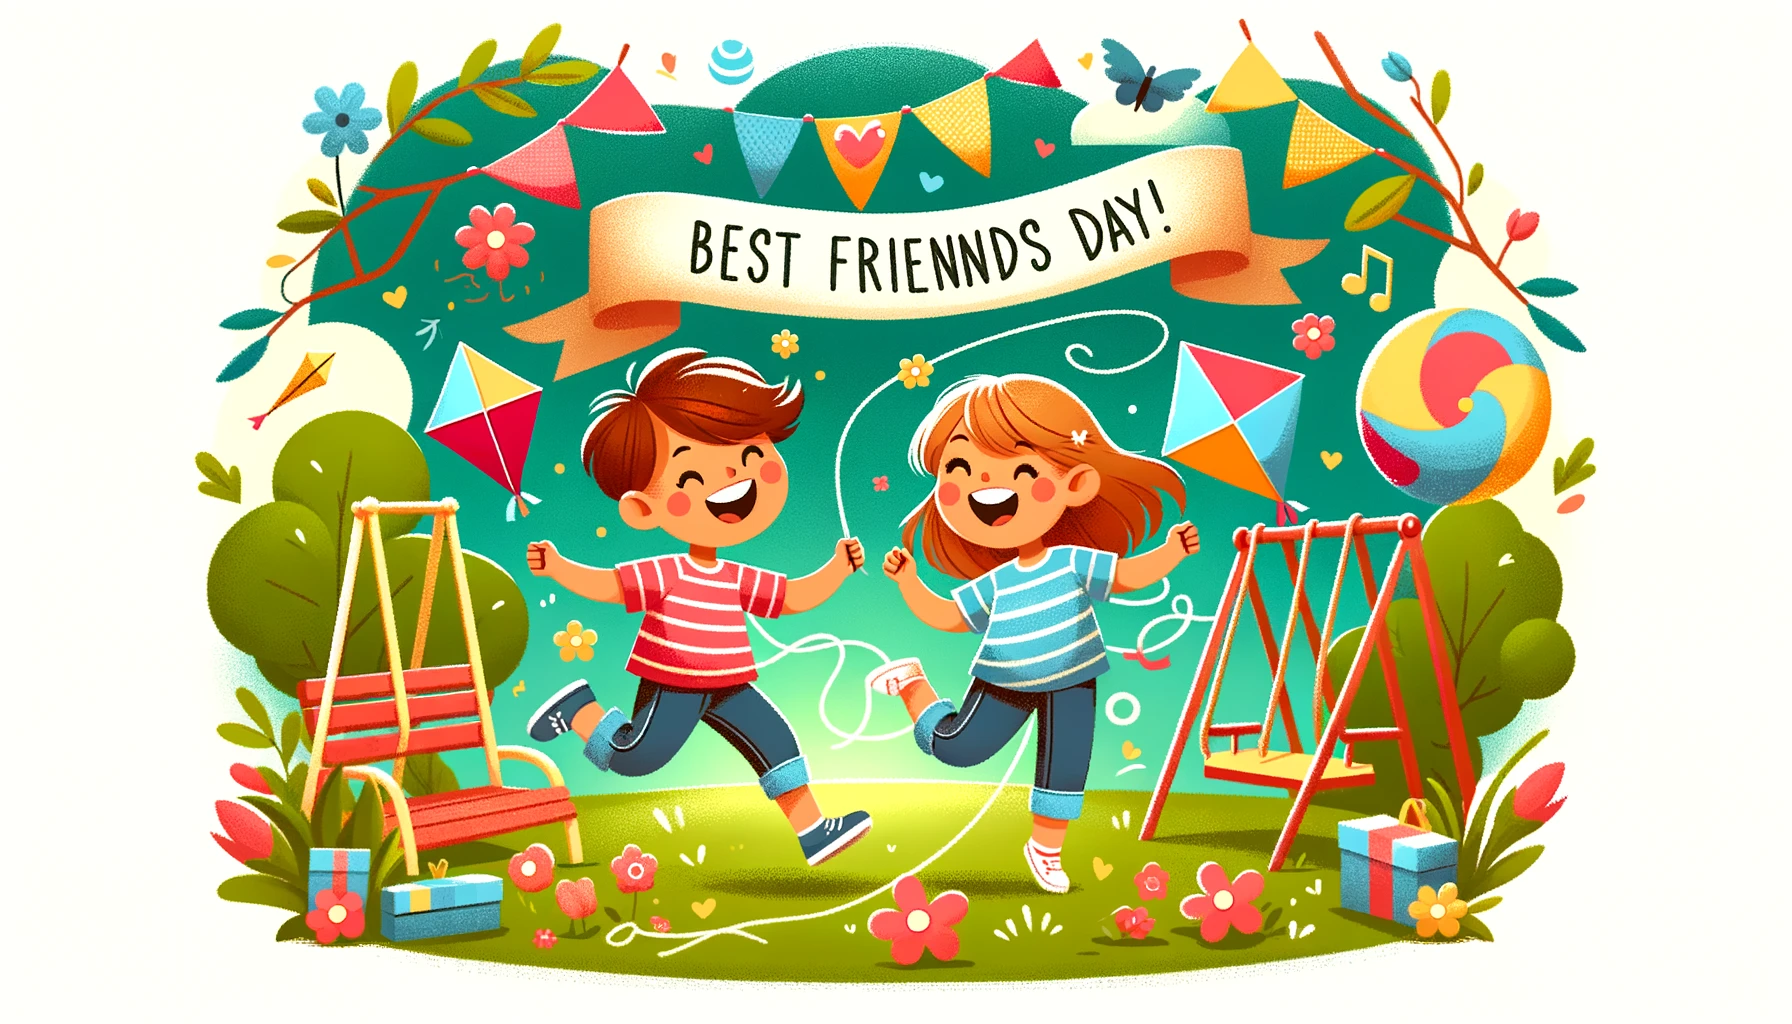 Celebrate National Best Friends Day with Heartfelt Messages